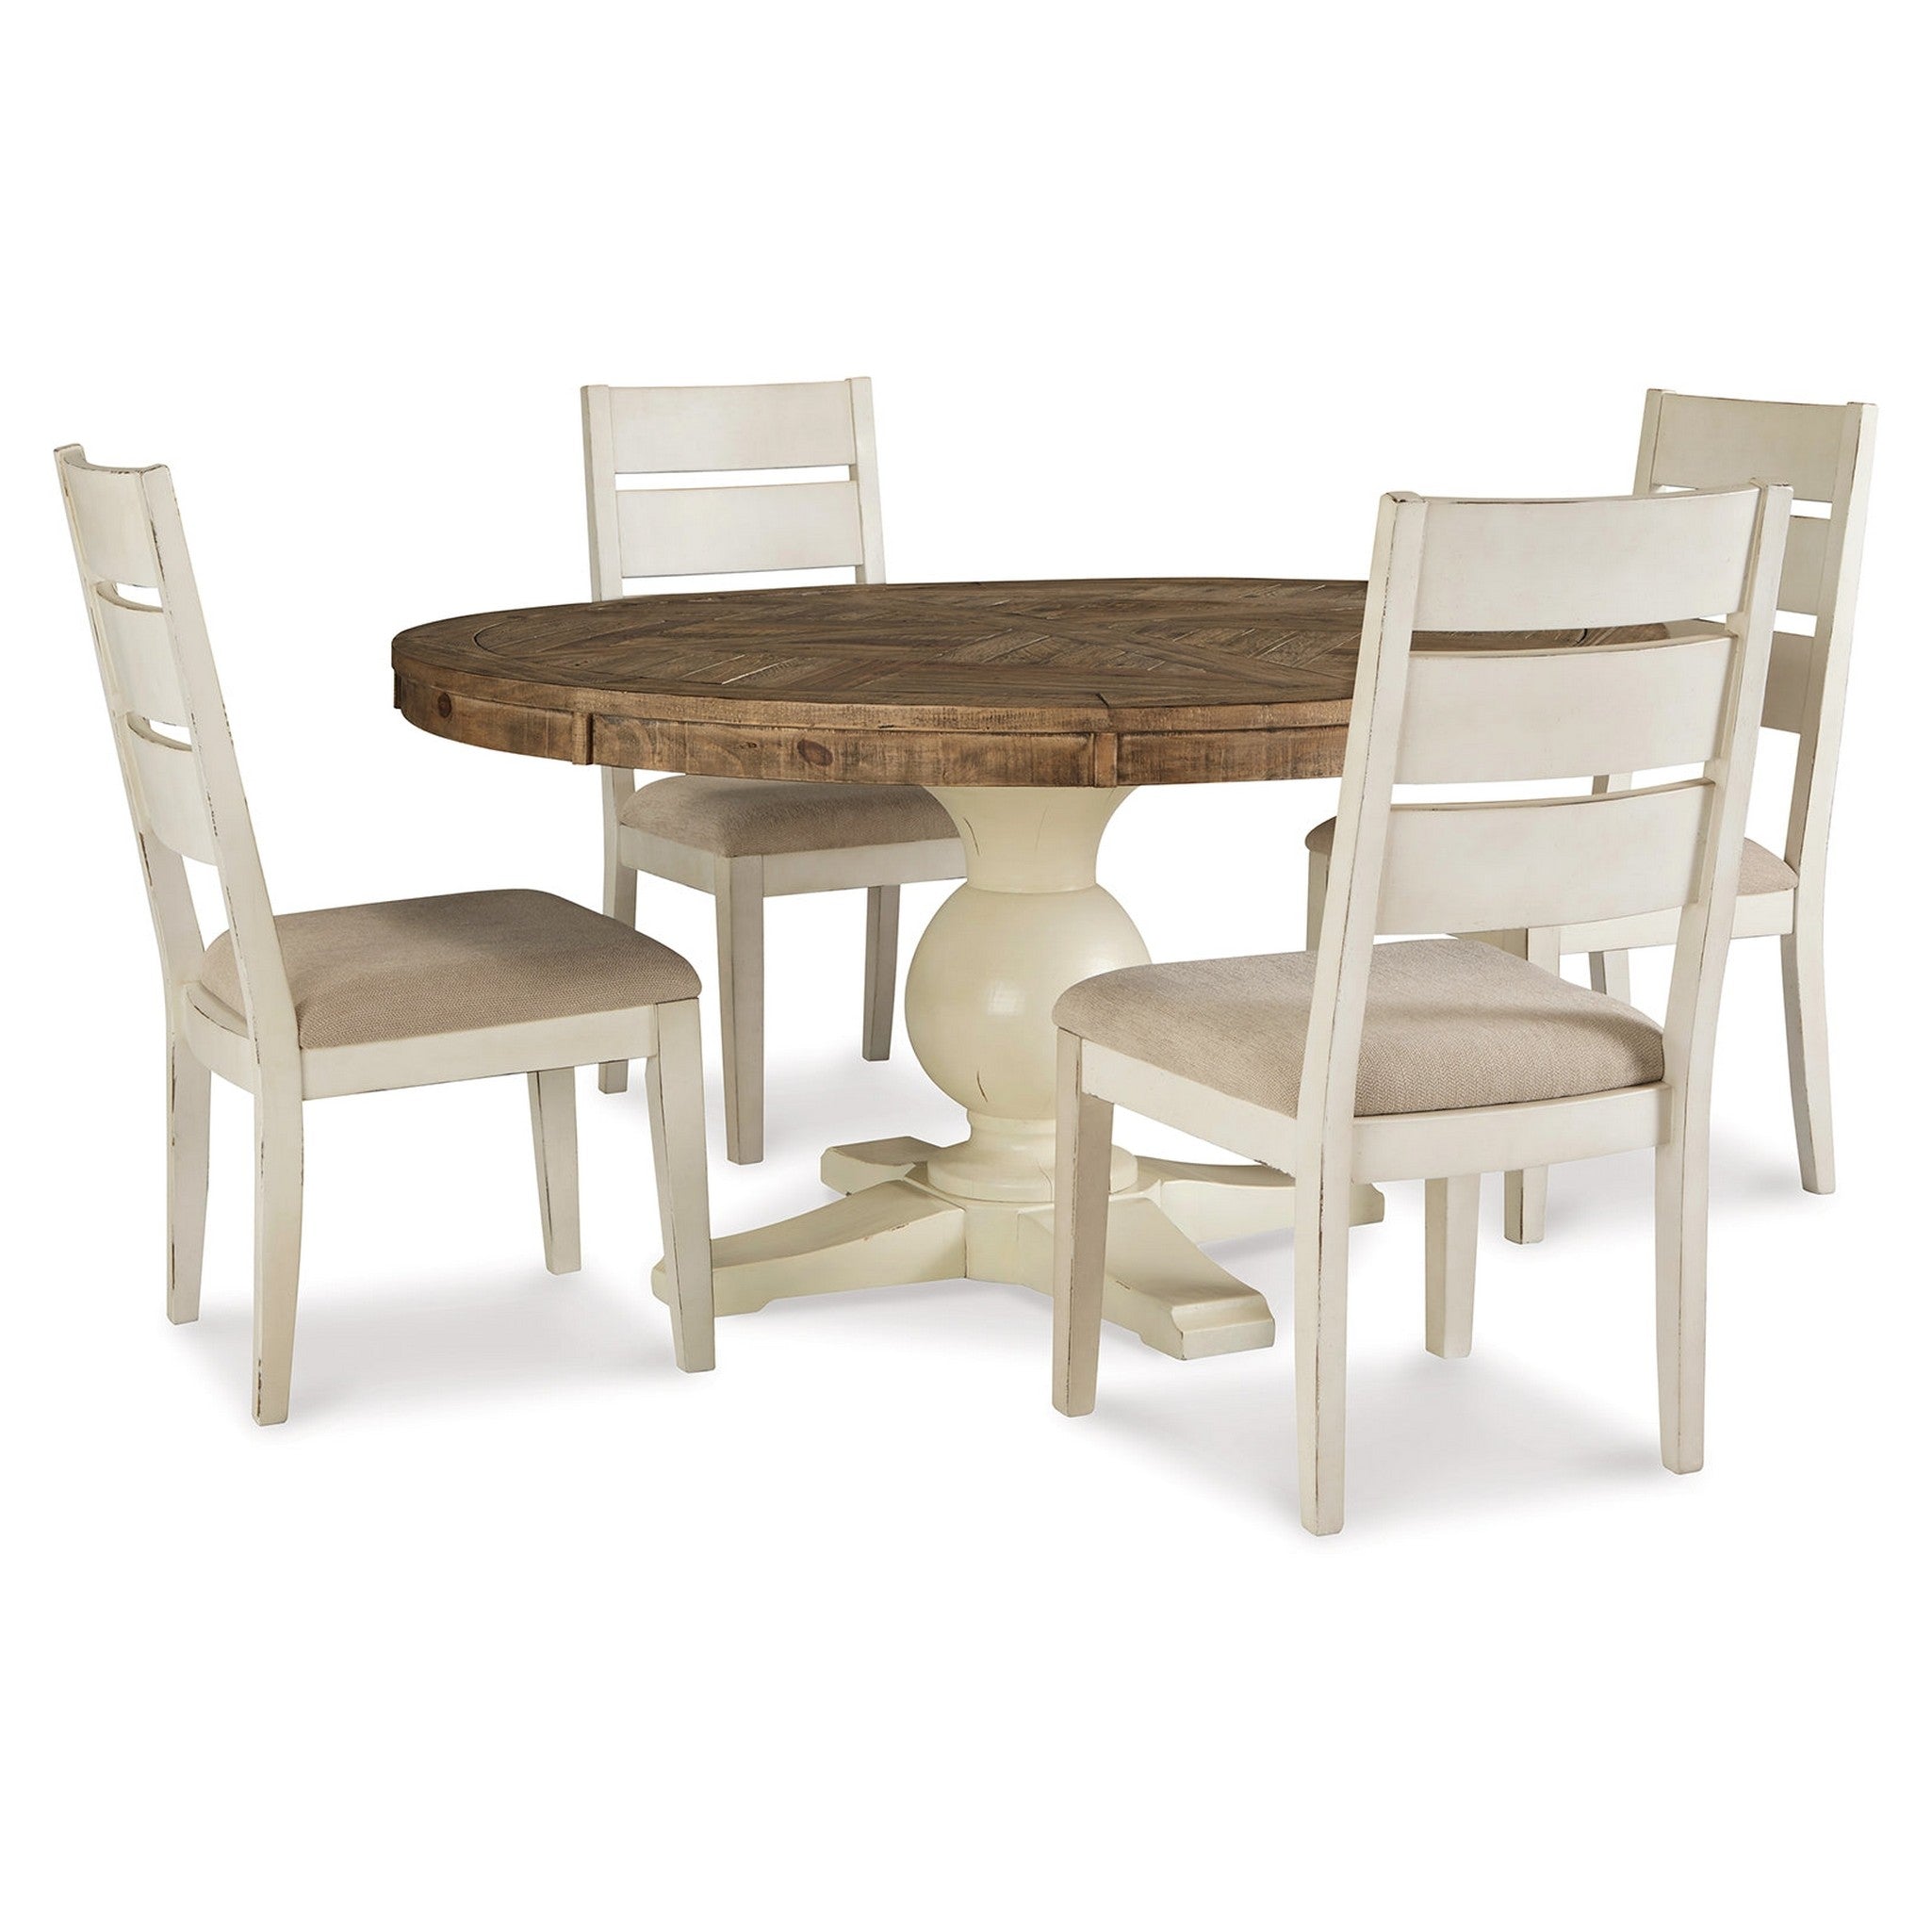 Grindleburg Dining Table and 4 Chairs Ash-D754D2